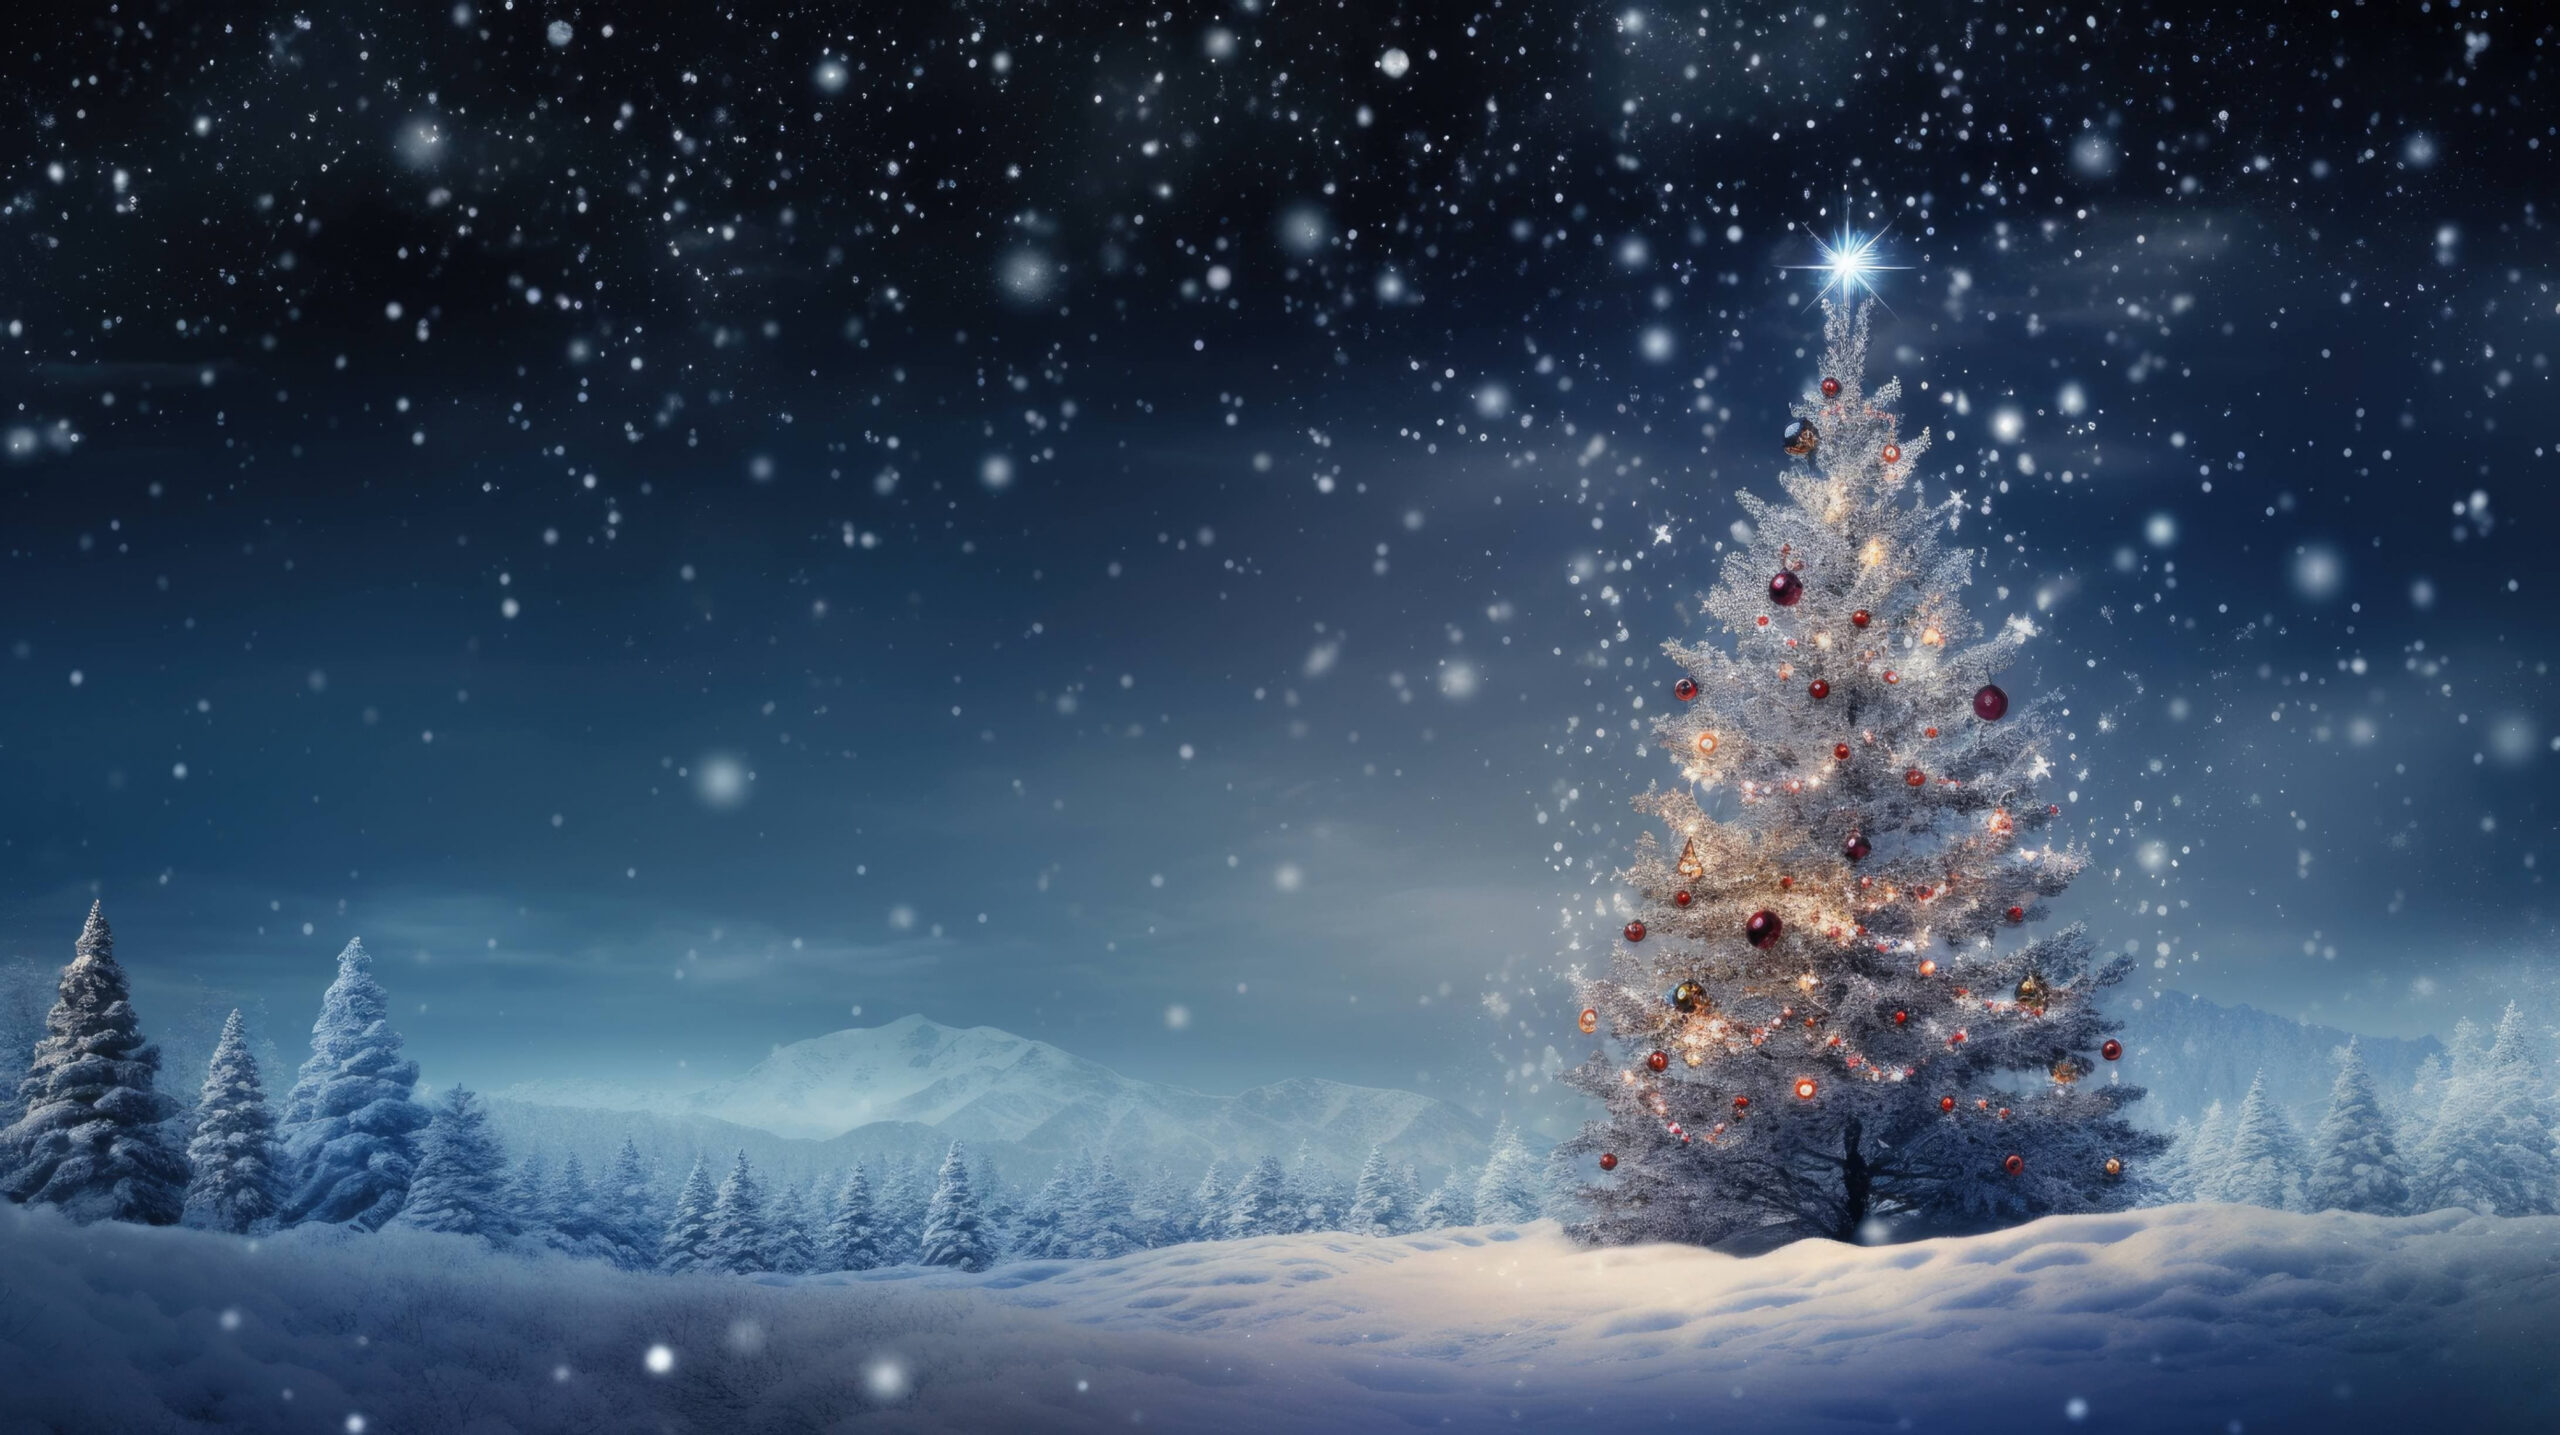 Free AI art images of christmas background holidays wallpaper